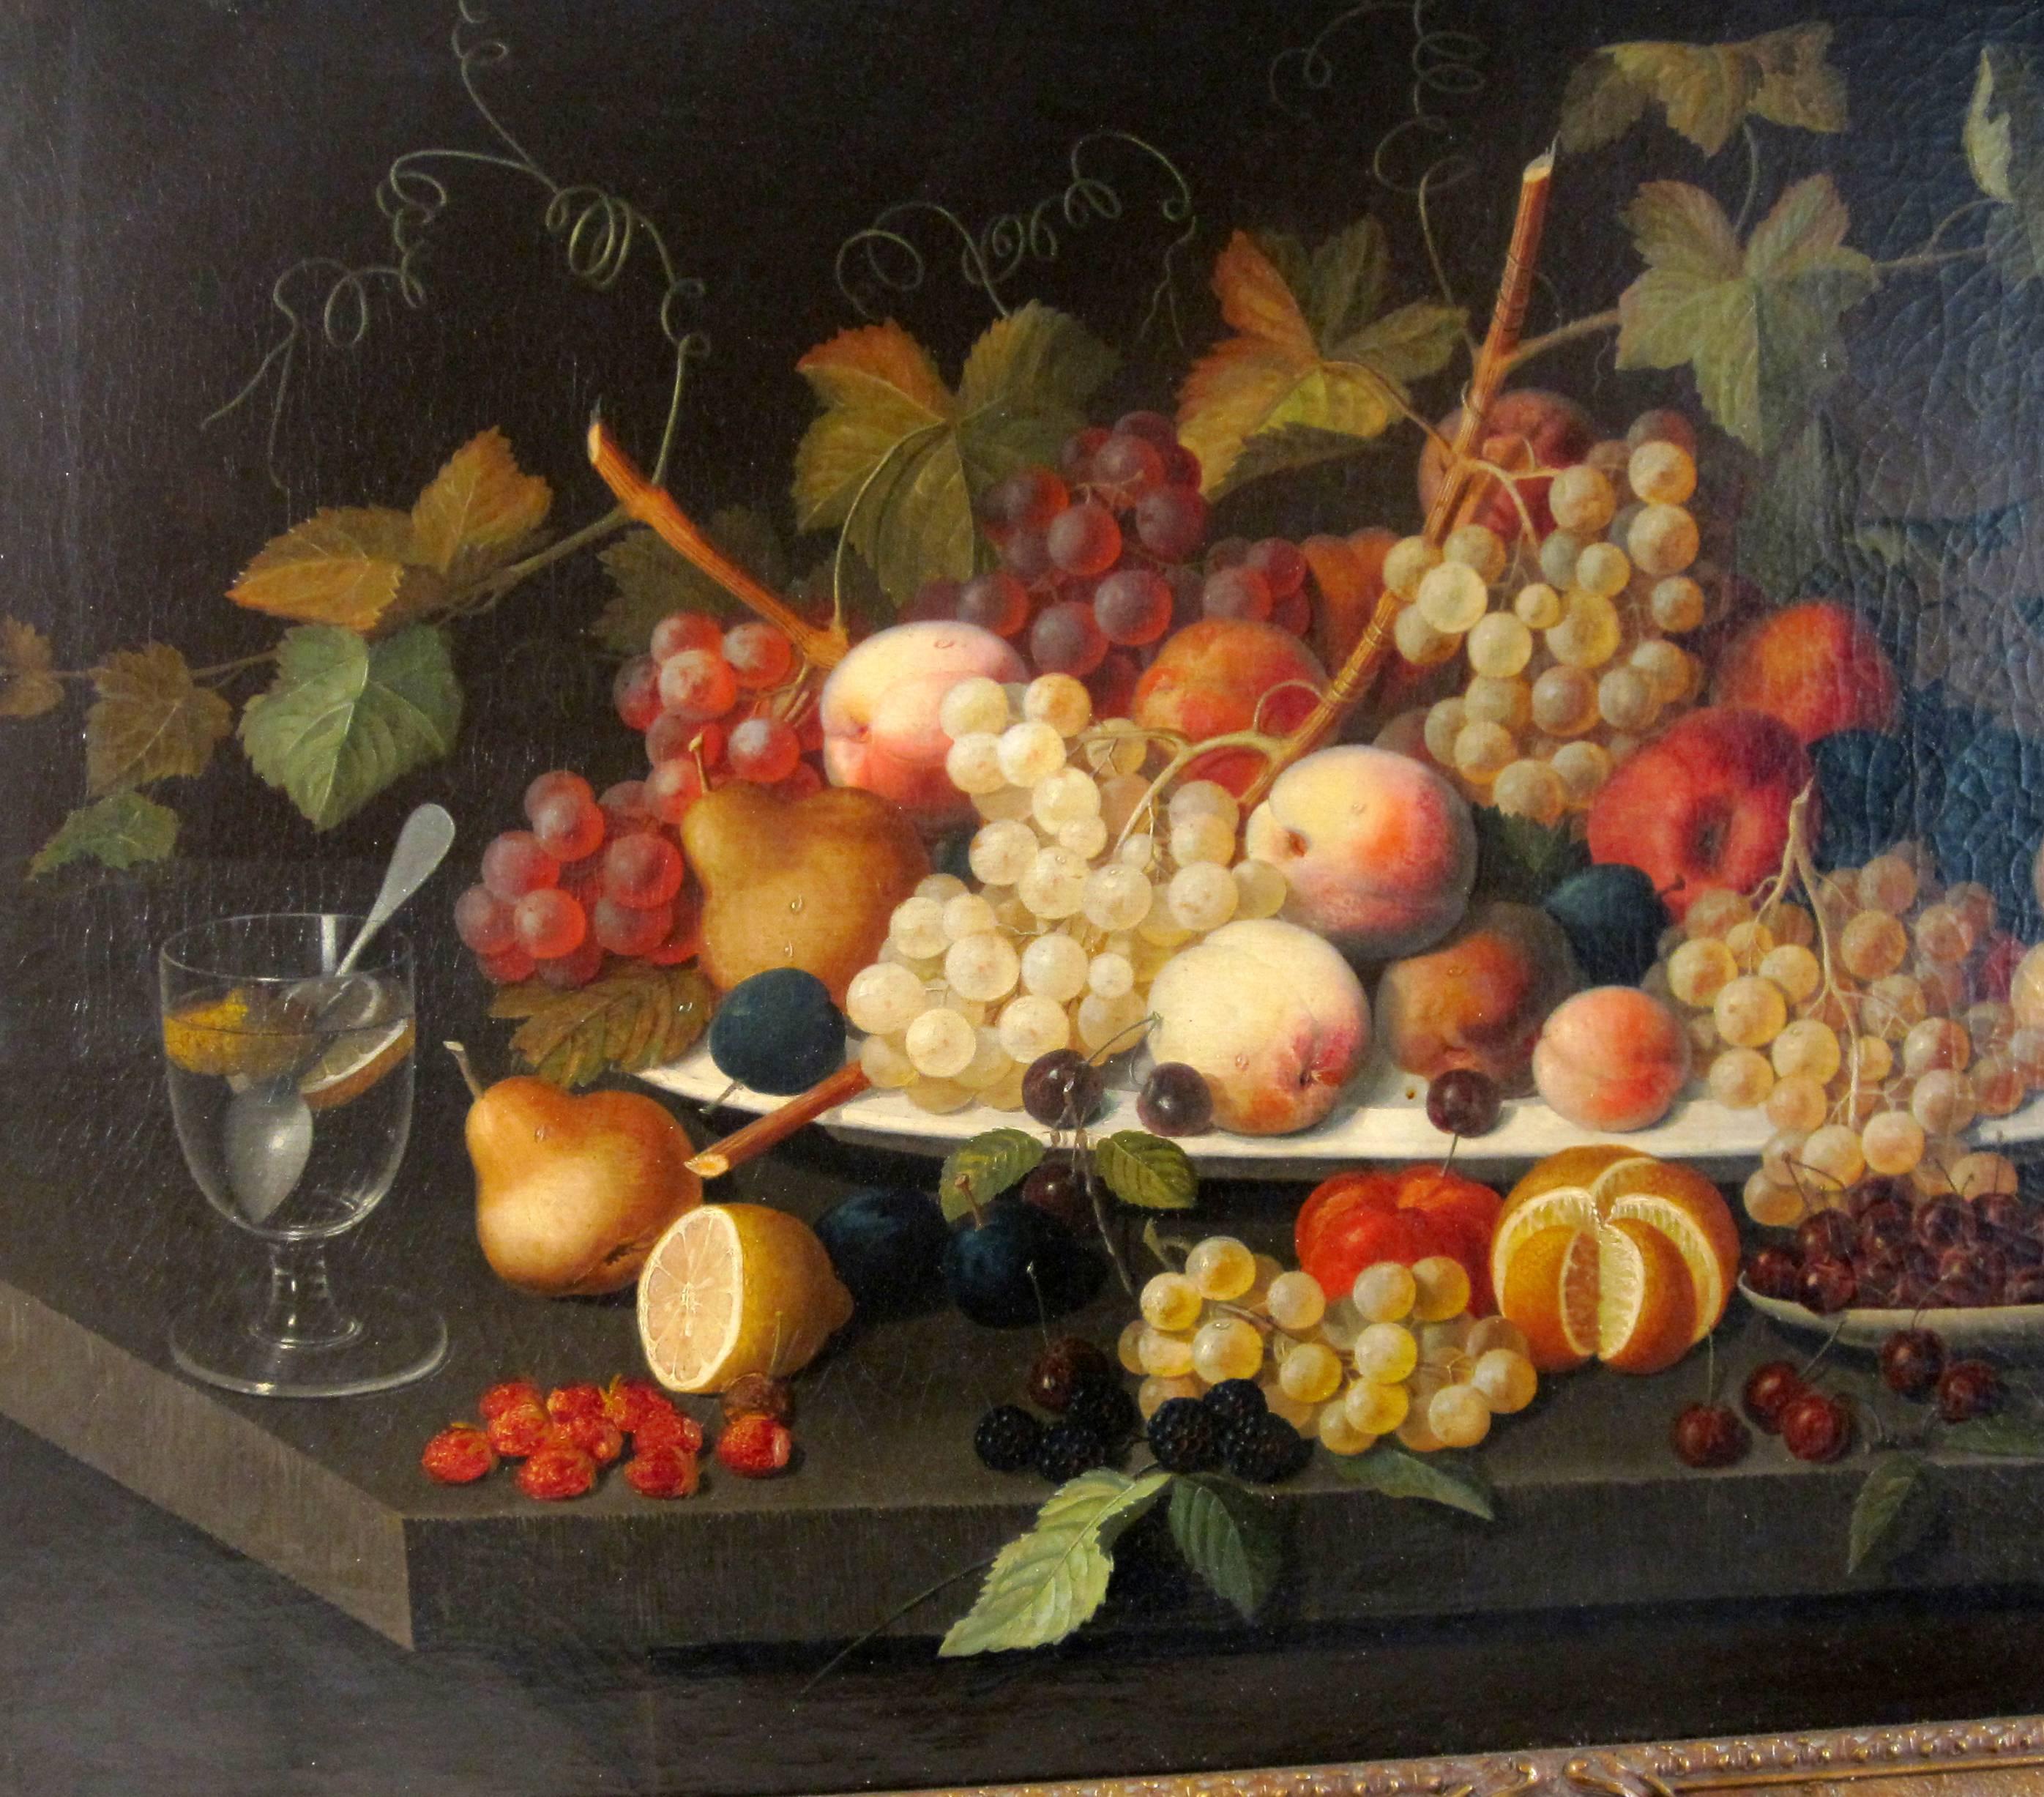 American Classical Sevrin Roesen Still Life Painting Still Life with Fruit on a Platter, American